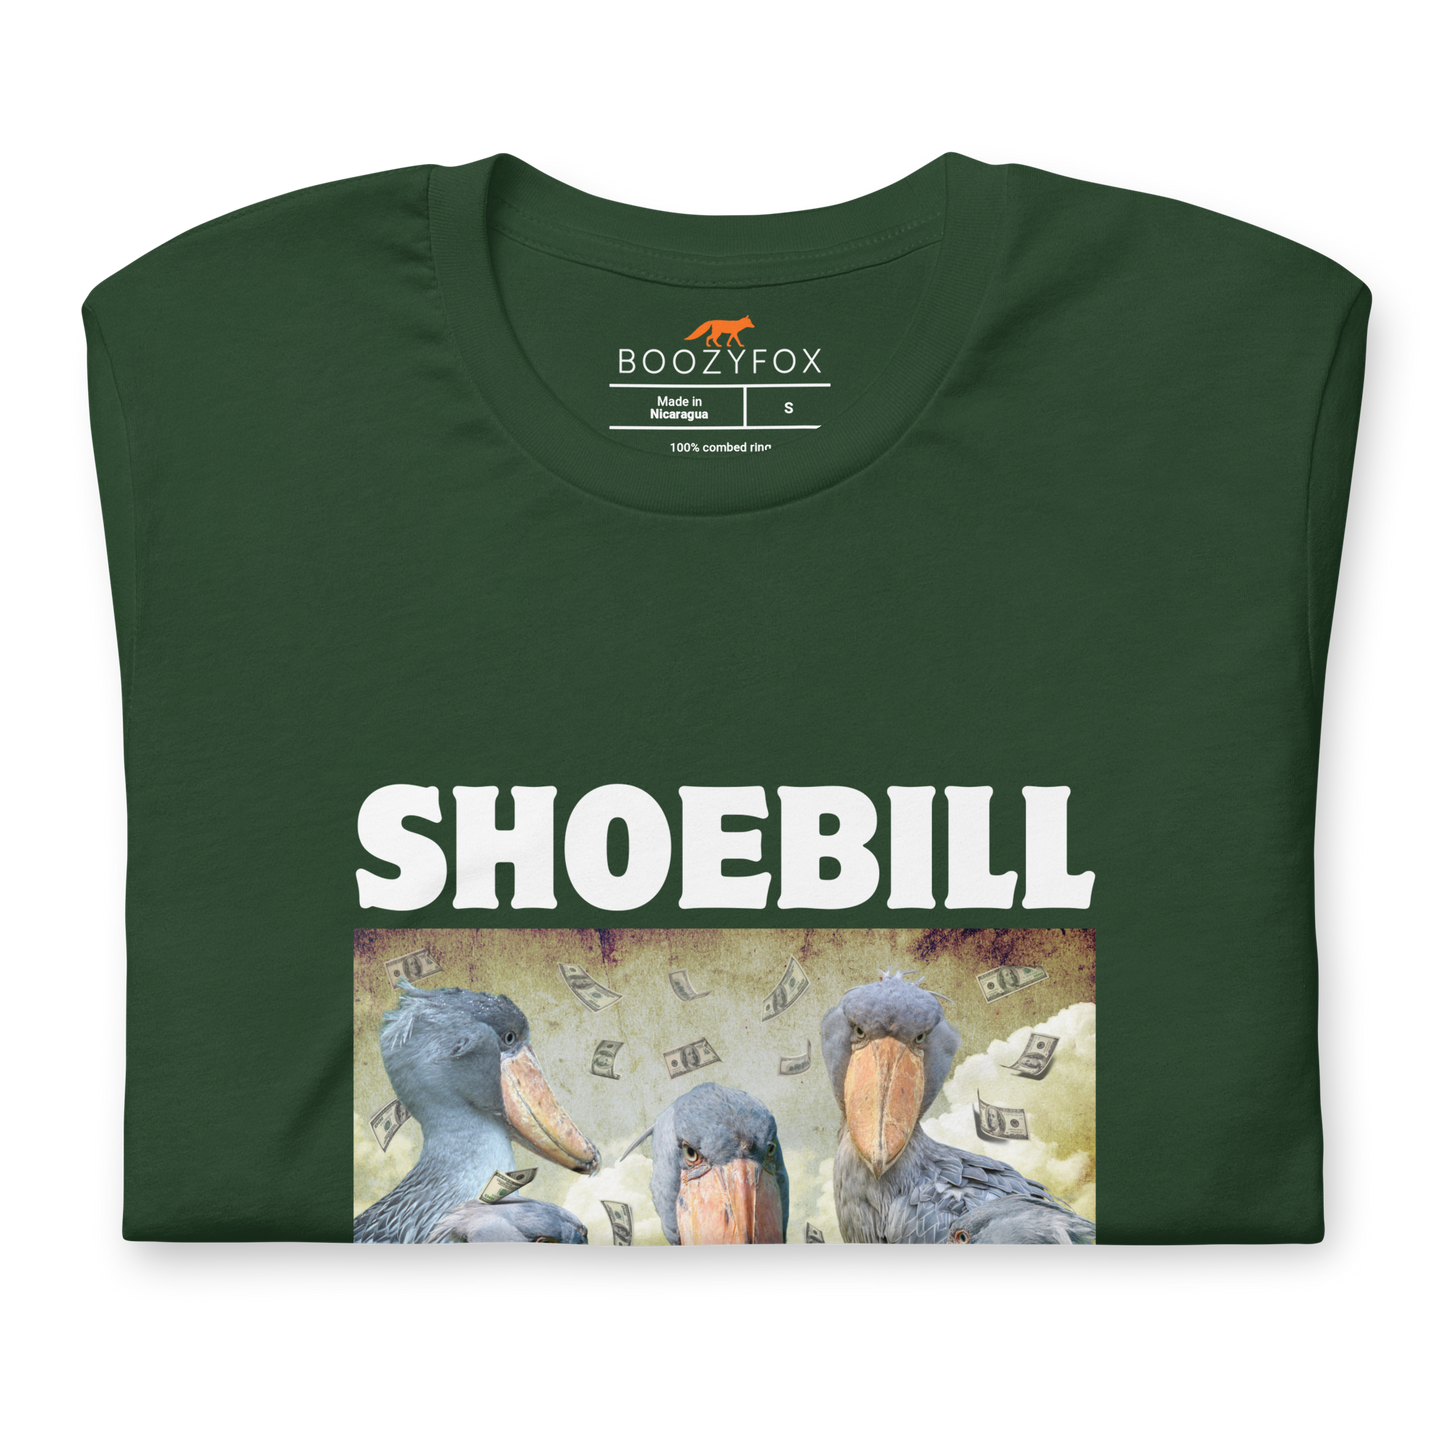 Front details of a Forest Green Premium Shoebill Tee featuring cool Shoebill graphic on the chest - Artsy/Funny Graphic Shoebill Stork Tees - Boozy Fox